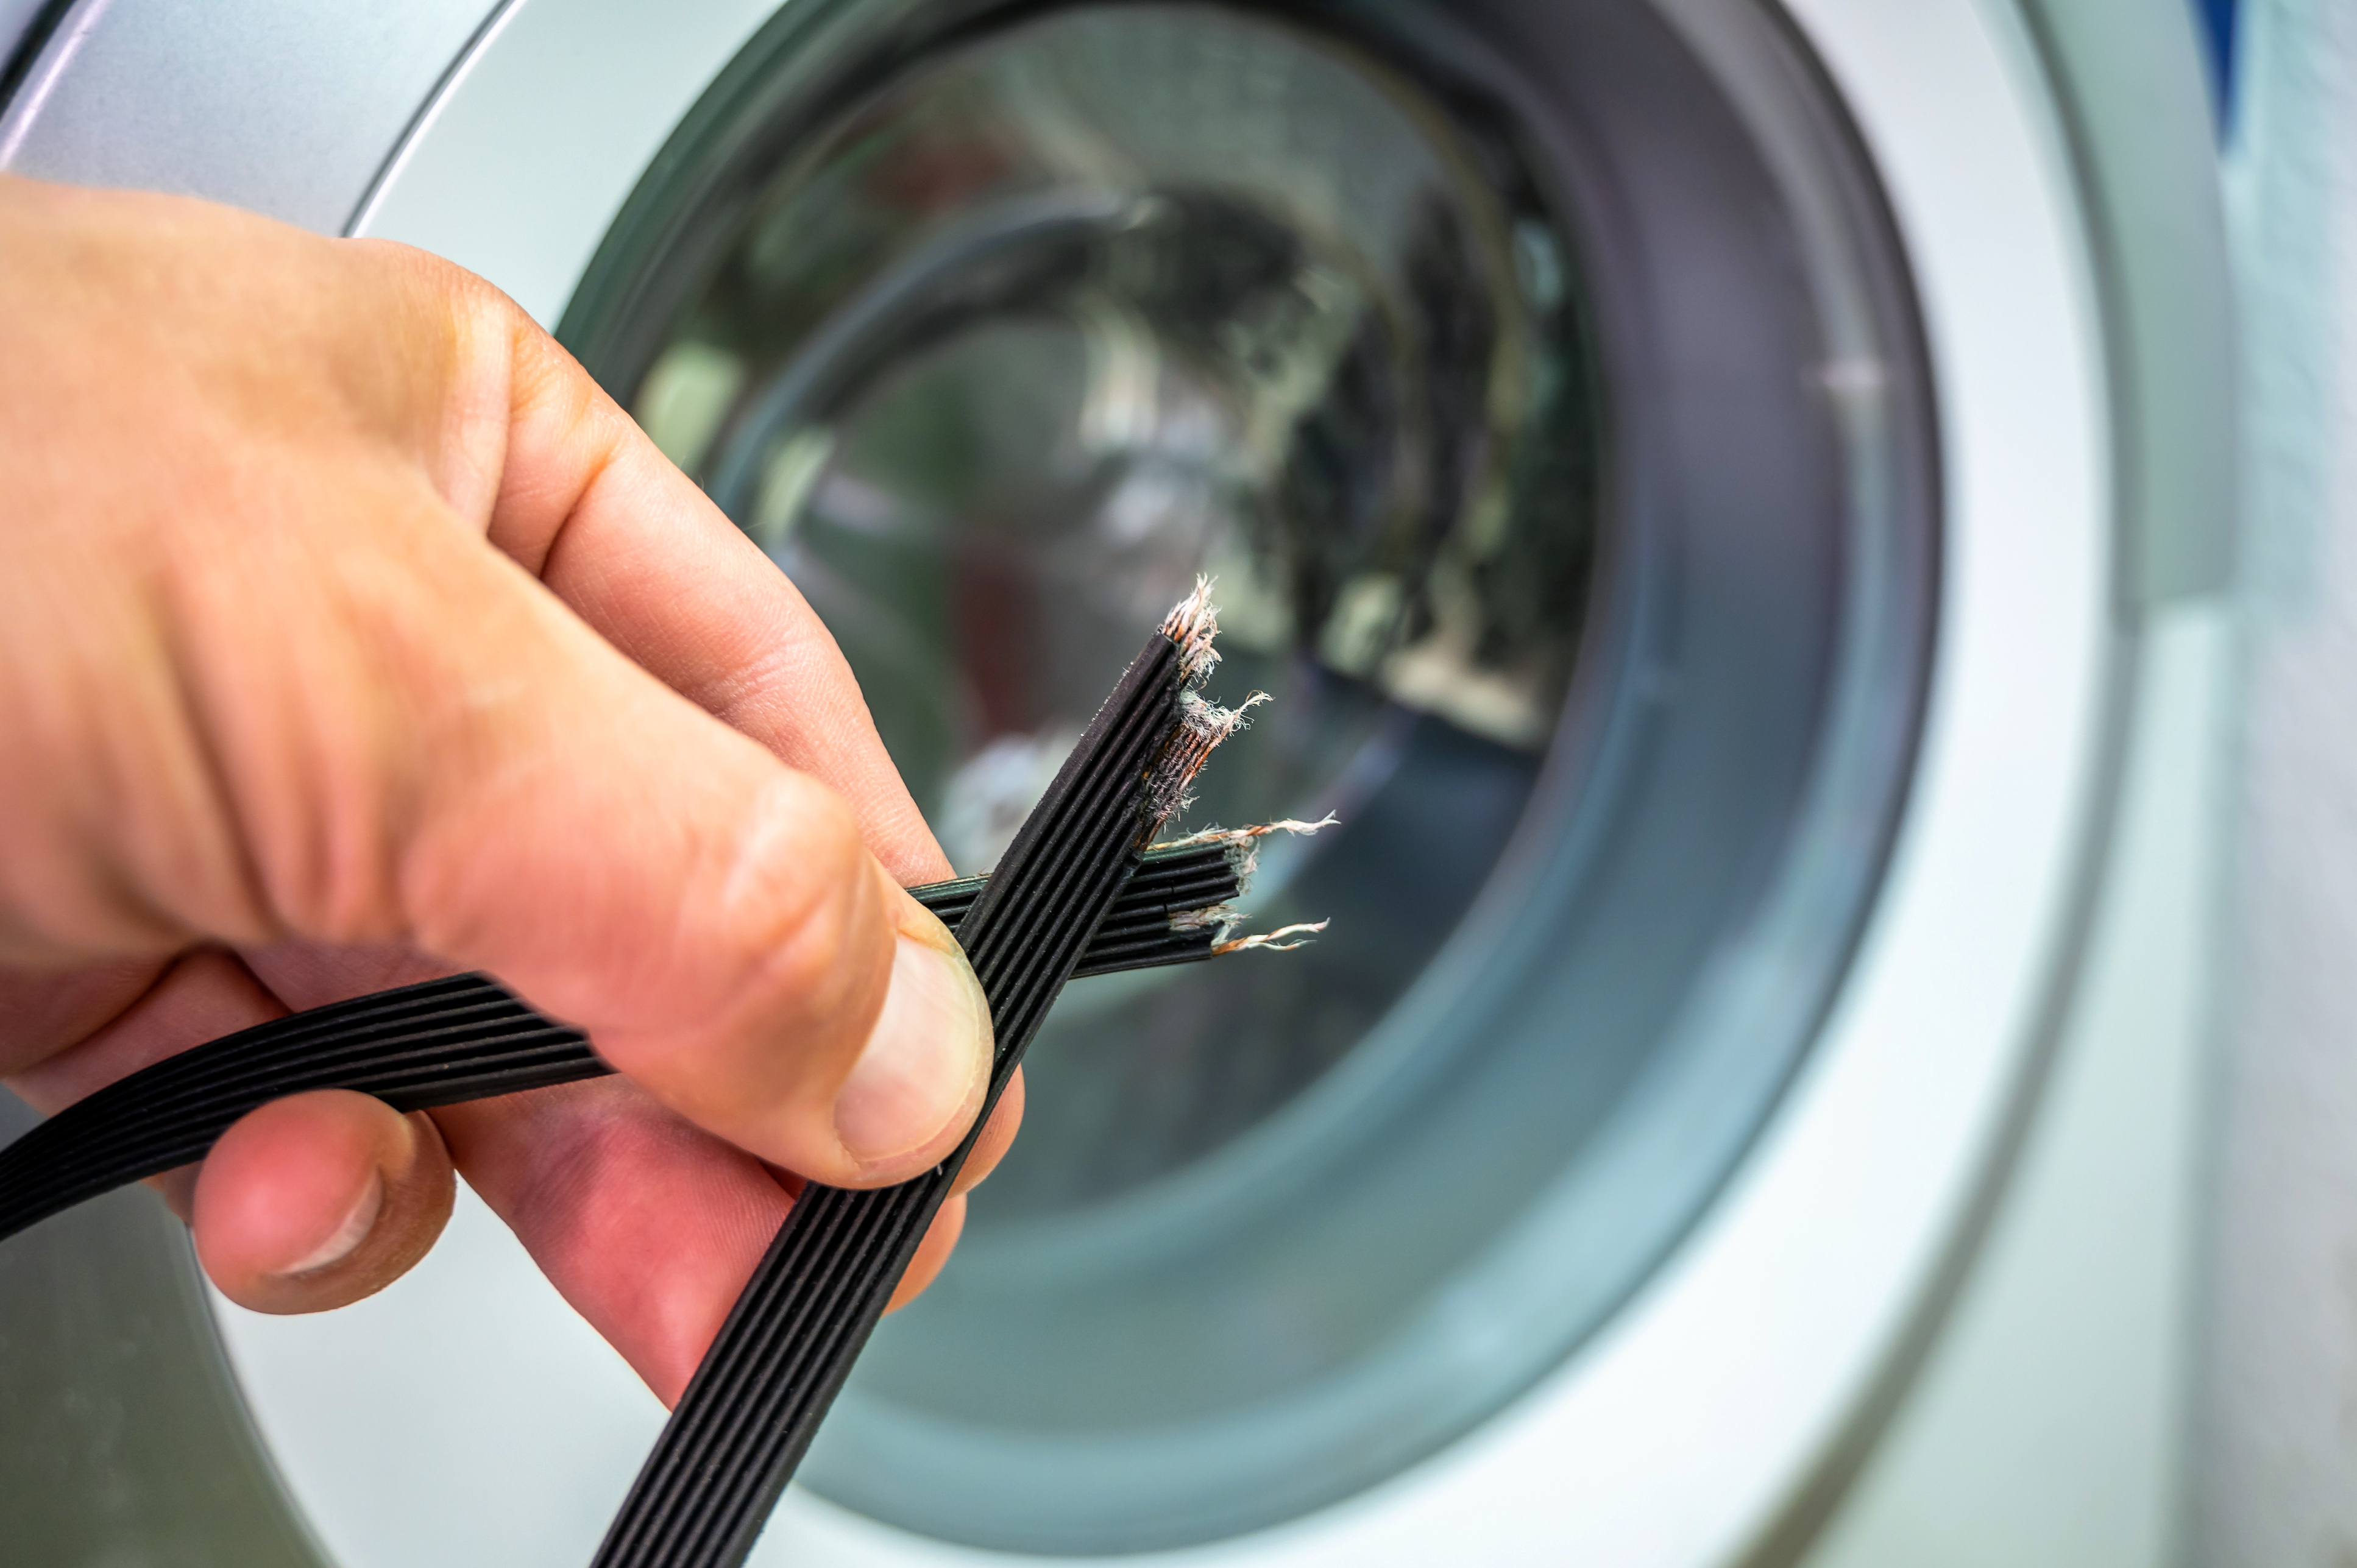 How to Fix a Whirlpool Washer Not Spinning, Don's Appliances